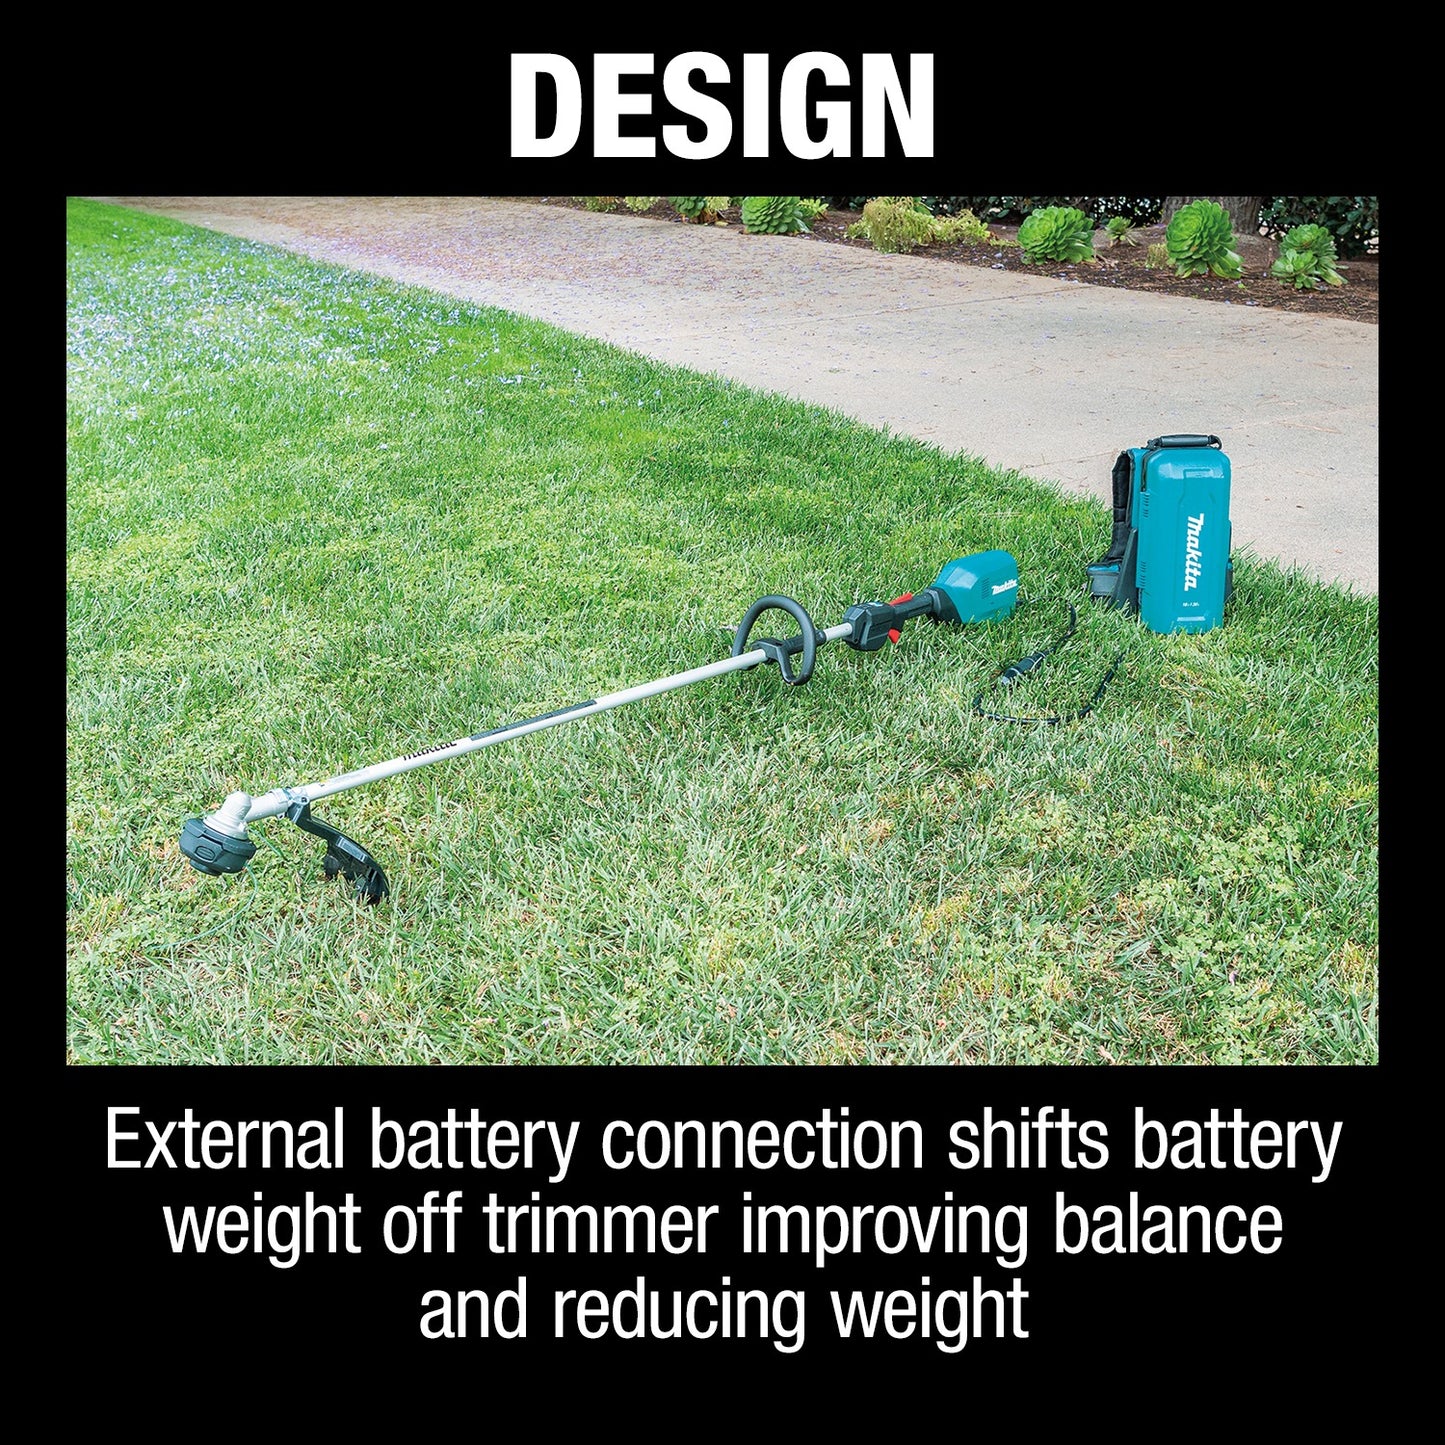 Makita CRU03Z 40V max ConnectX™ Brushless String Trimmer, Tool Only